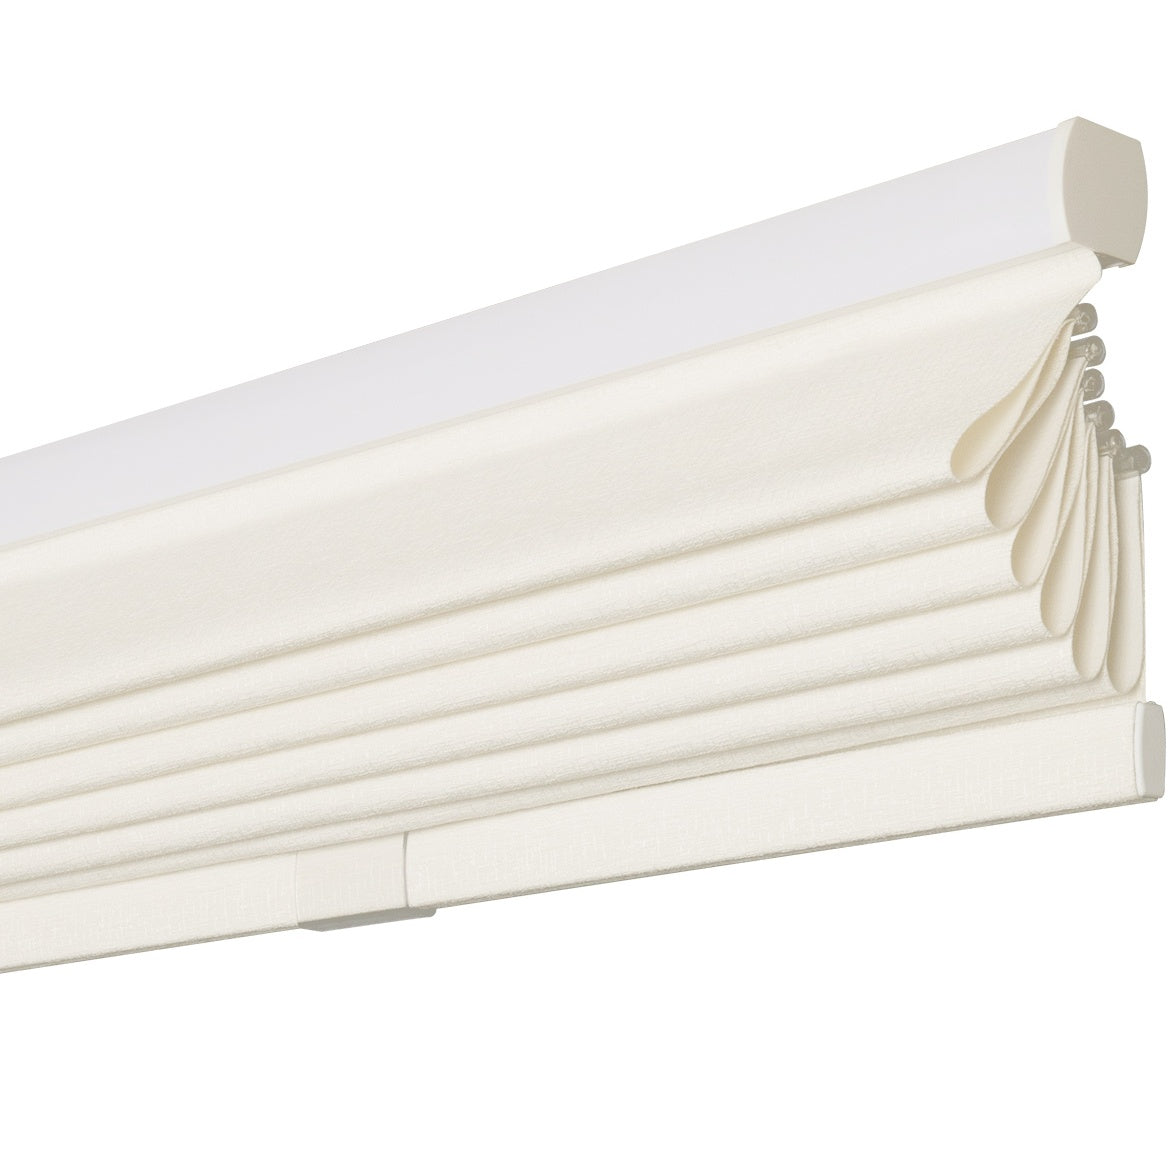 Close-up view of cream-colored sheer Roman blinds with a seamless top casing, highlighting sleek and stylish cordless functionality